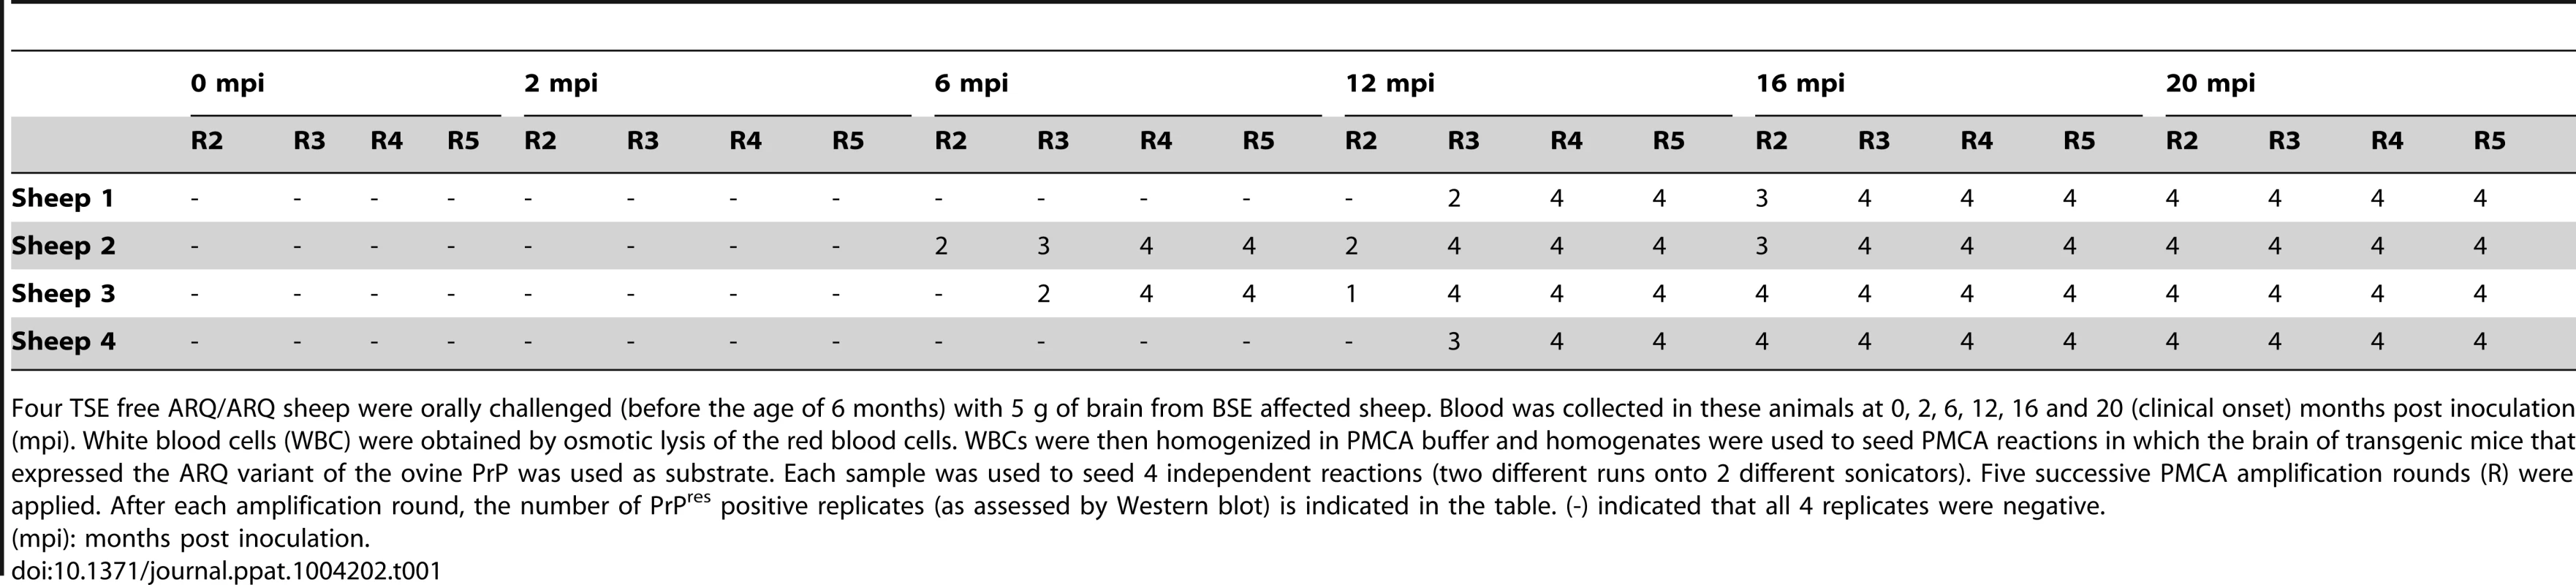 PrP<sup>res</sup> detection in Protein Misfolding Cyclic Amplification (PMCA) reactions seeded with white blood cells from ARQ/ARQ sheep orally inoculated with BSE agent, collected at different time points of the incubation period.